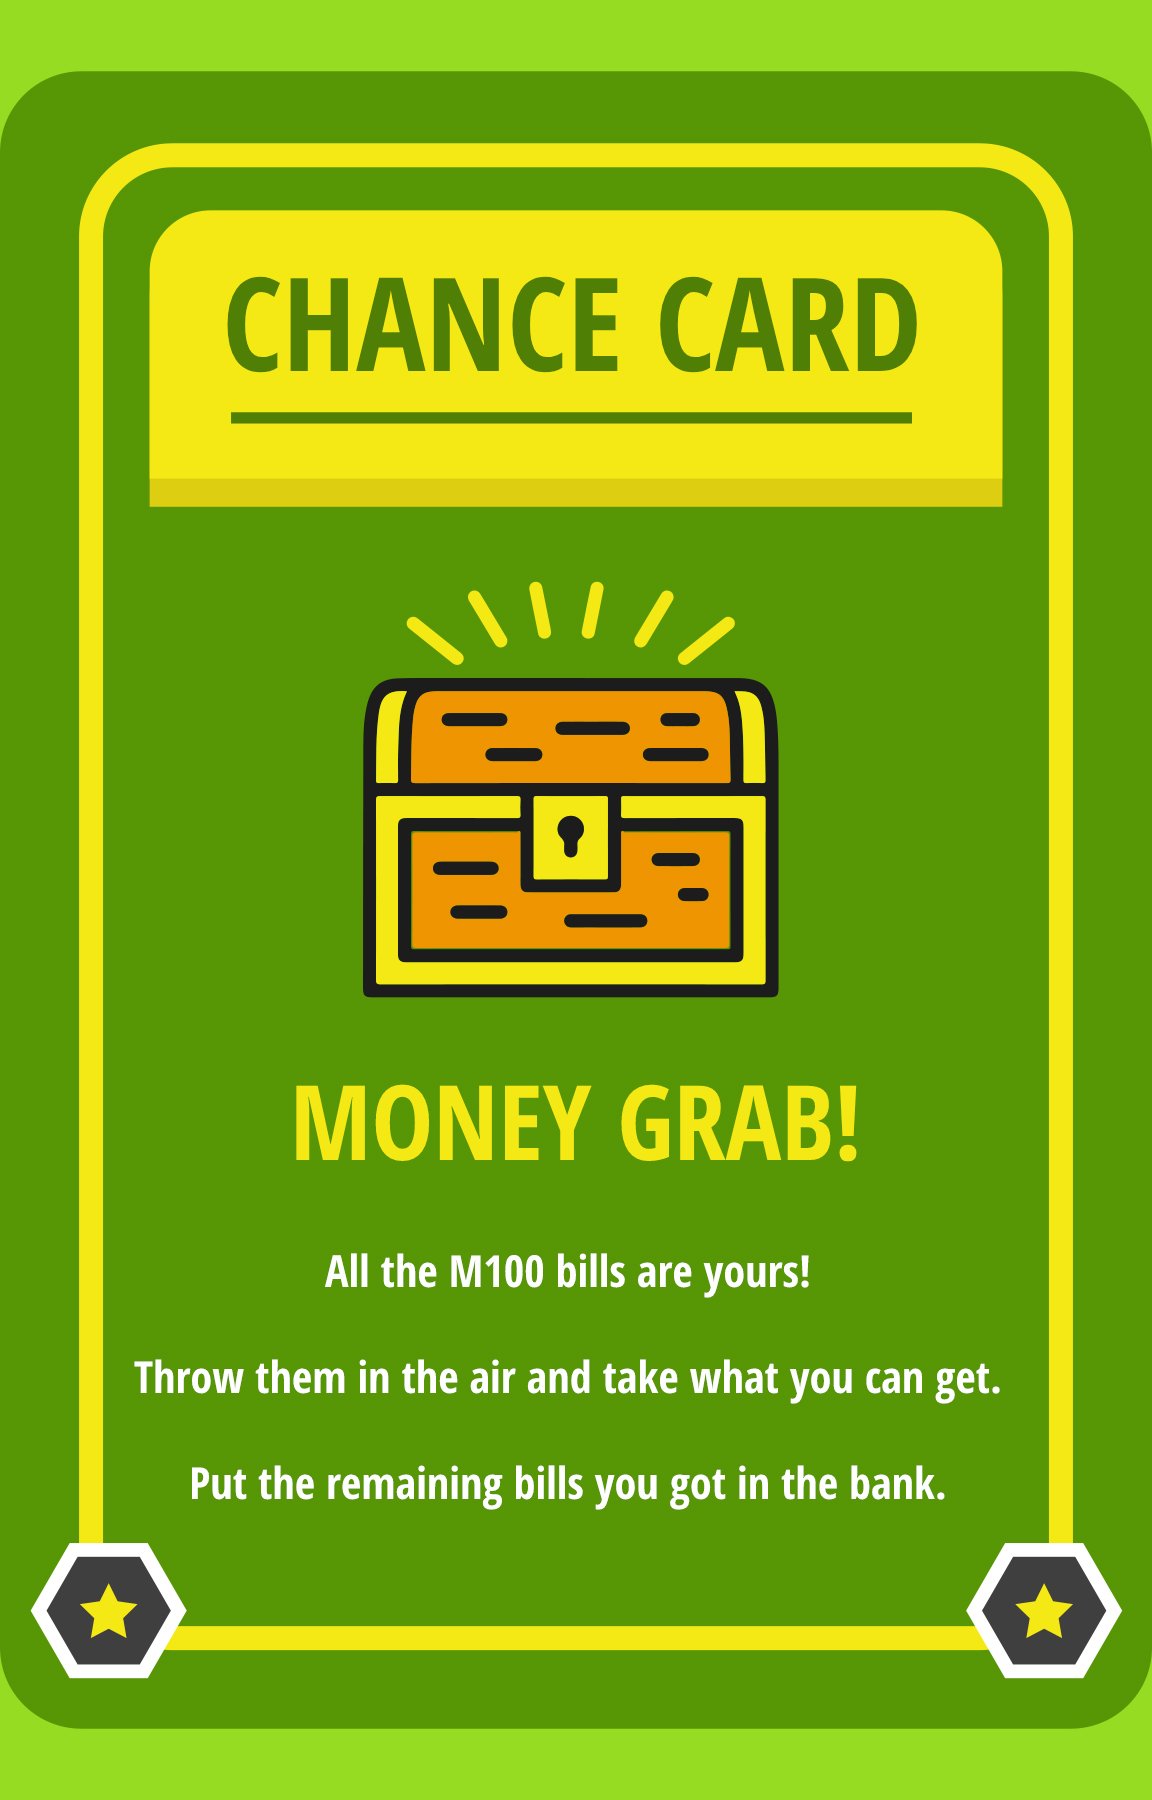 free-monopoly-chance-card-template-download-in-pdf-illustrator-psd-svg-template